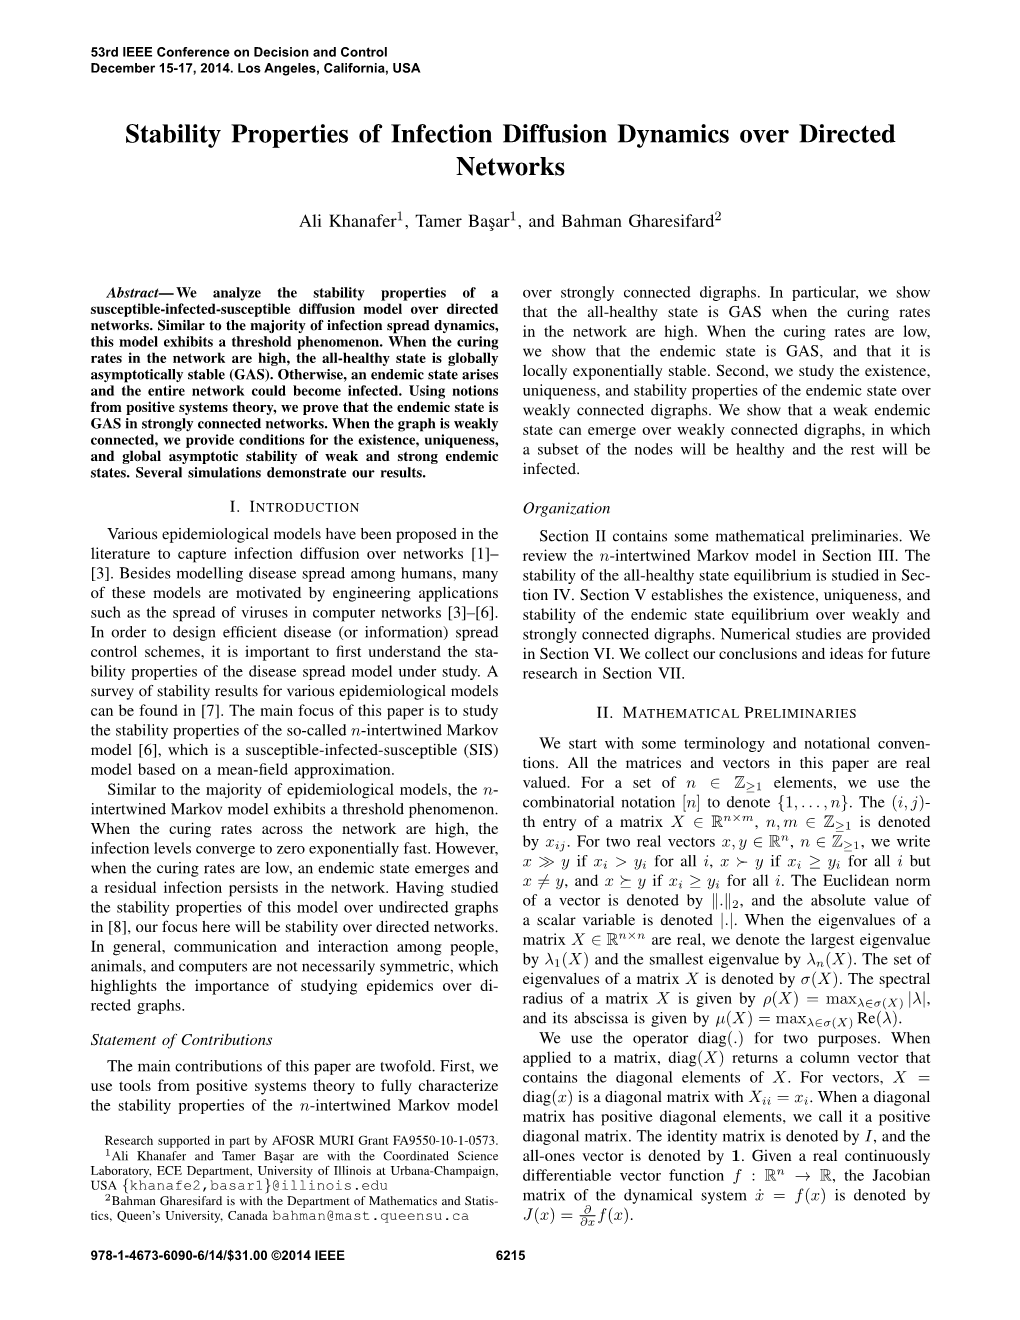 Stability Properties of Infection Diffusion Dynamics Over Directed Networks